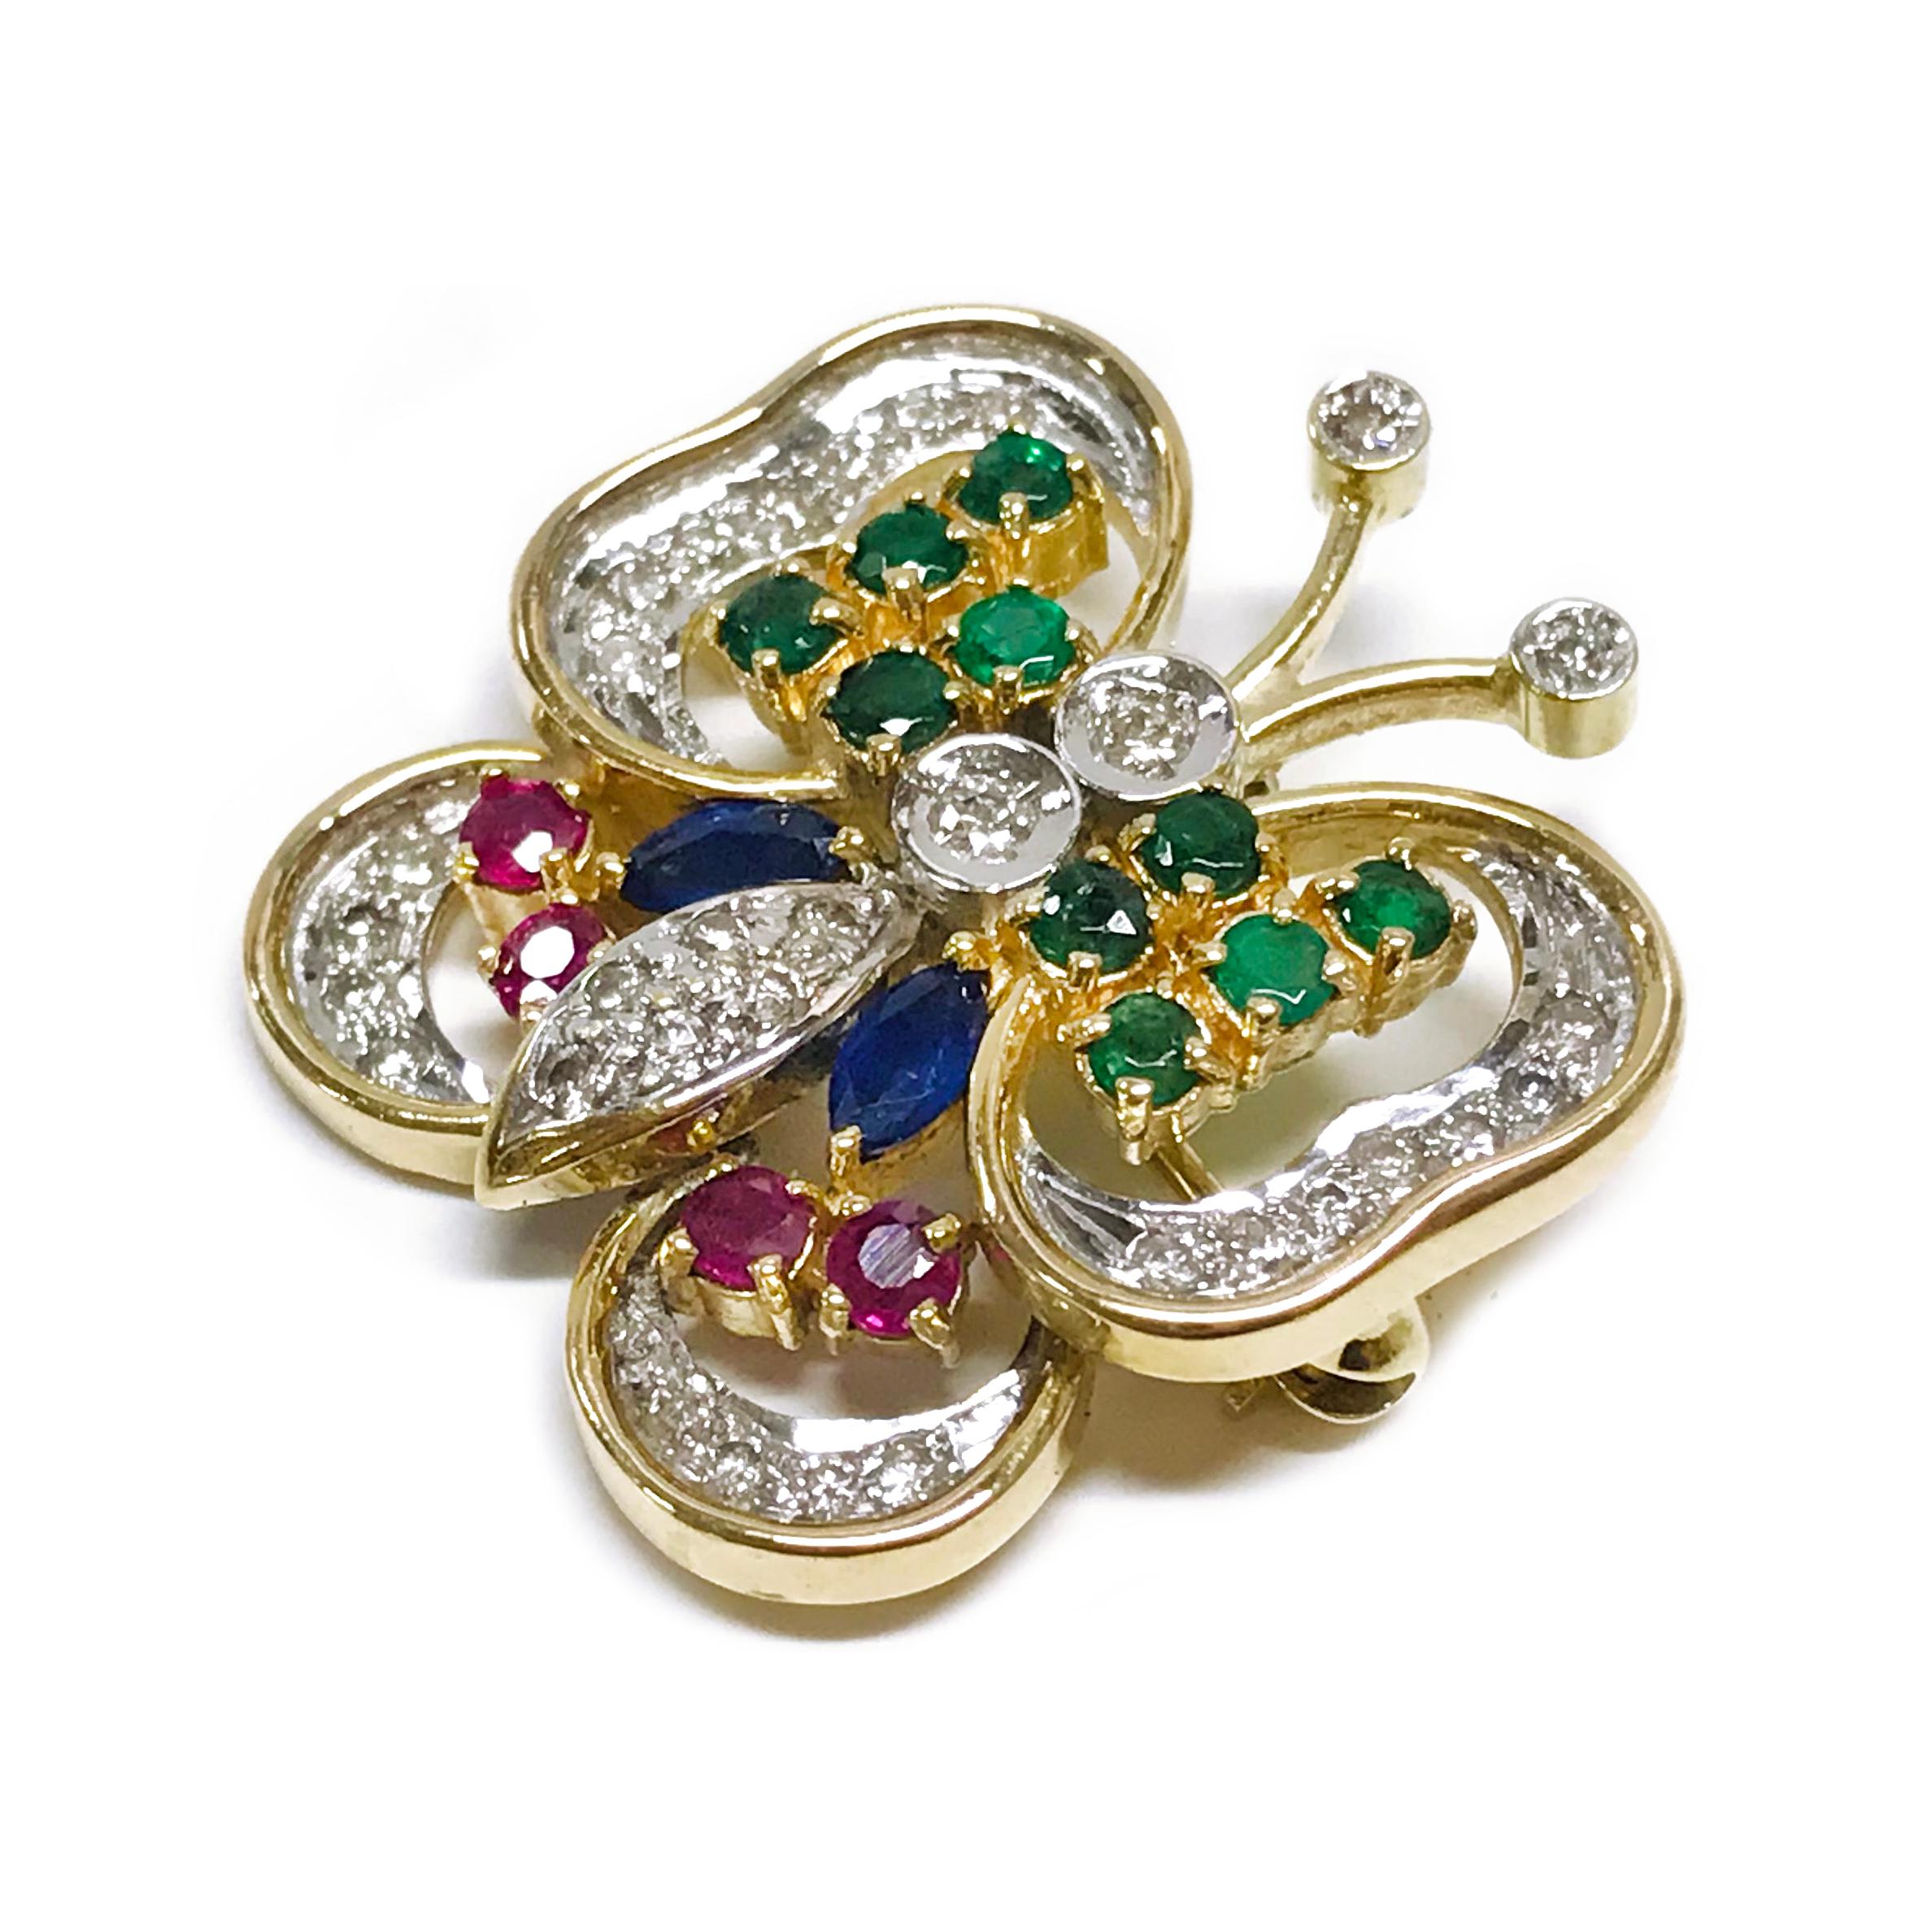 Diamond Ruby Sapphire Emerald Butterfly Brooch/Pin. This lovely little fella features ten round emeralds, two marquise blue sapphires, four round rubies, and thirty-four round diamonds. The color gemstones are all prong-set and the diamonds are